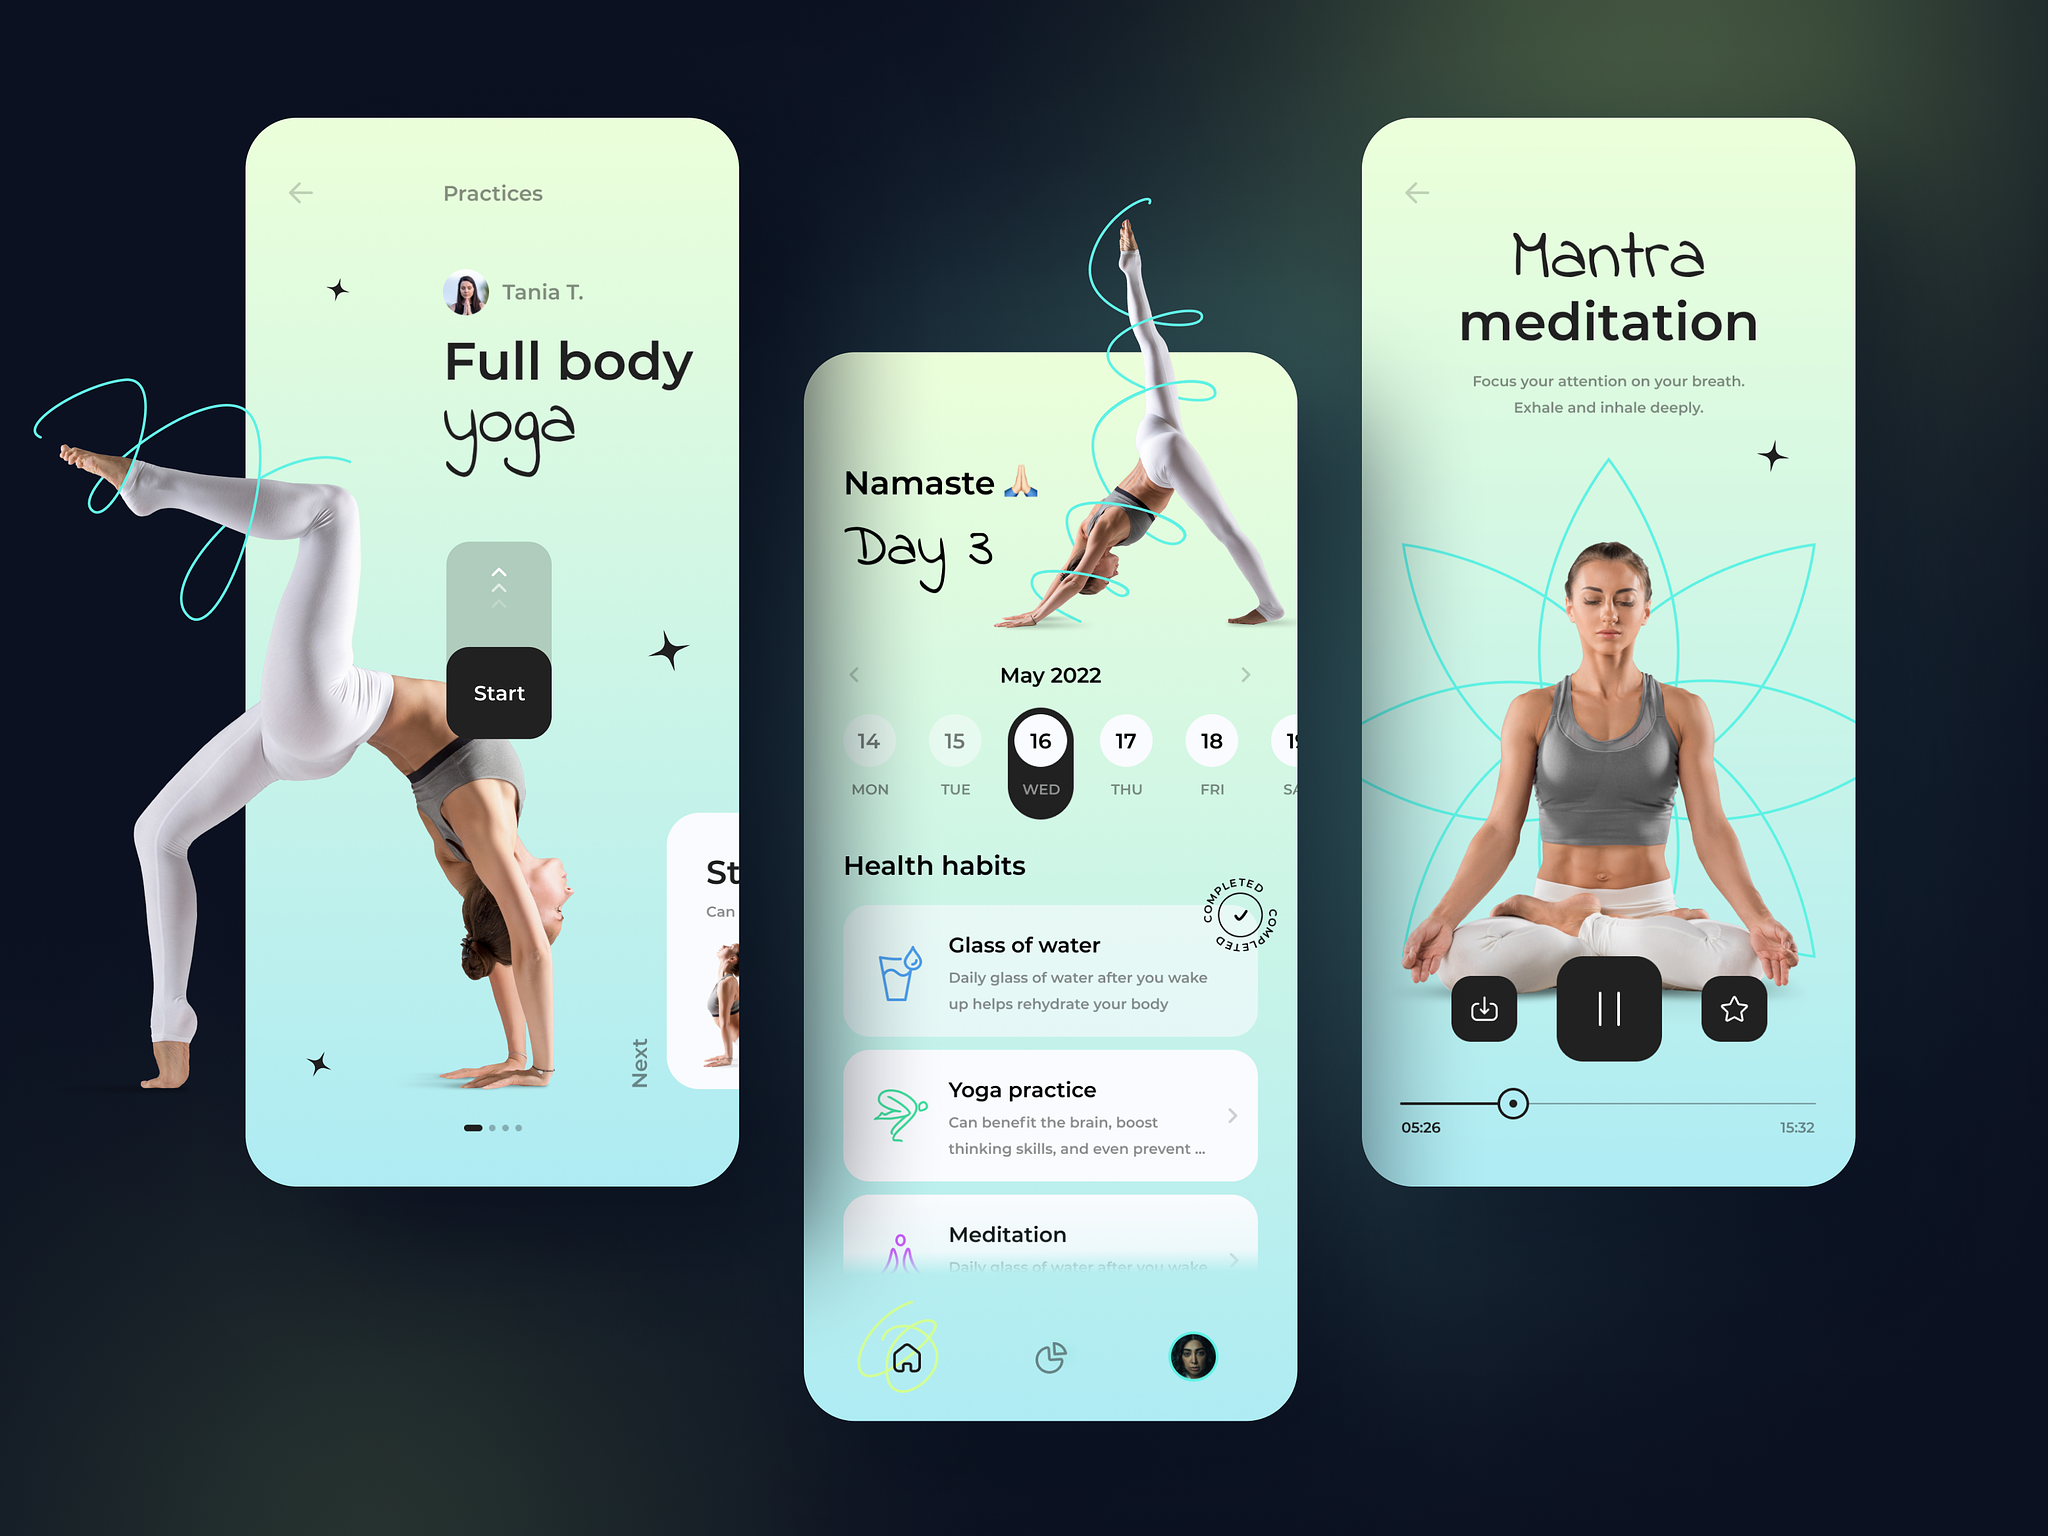 In the yoga app, users can follow a personalized sequence of poses and breathing exercises designed to enhance their practice and promote overall well-being.